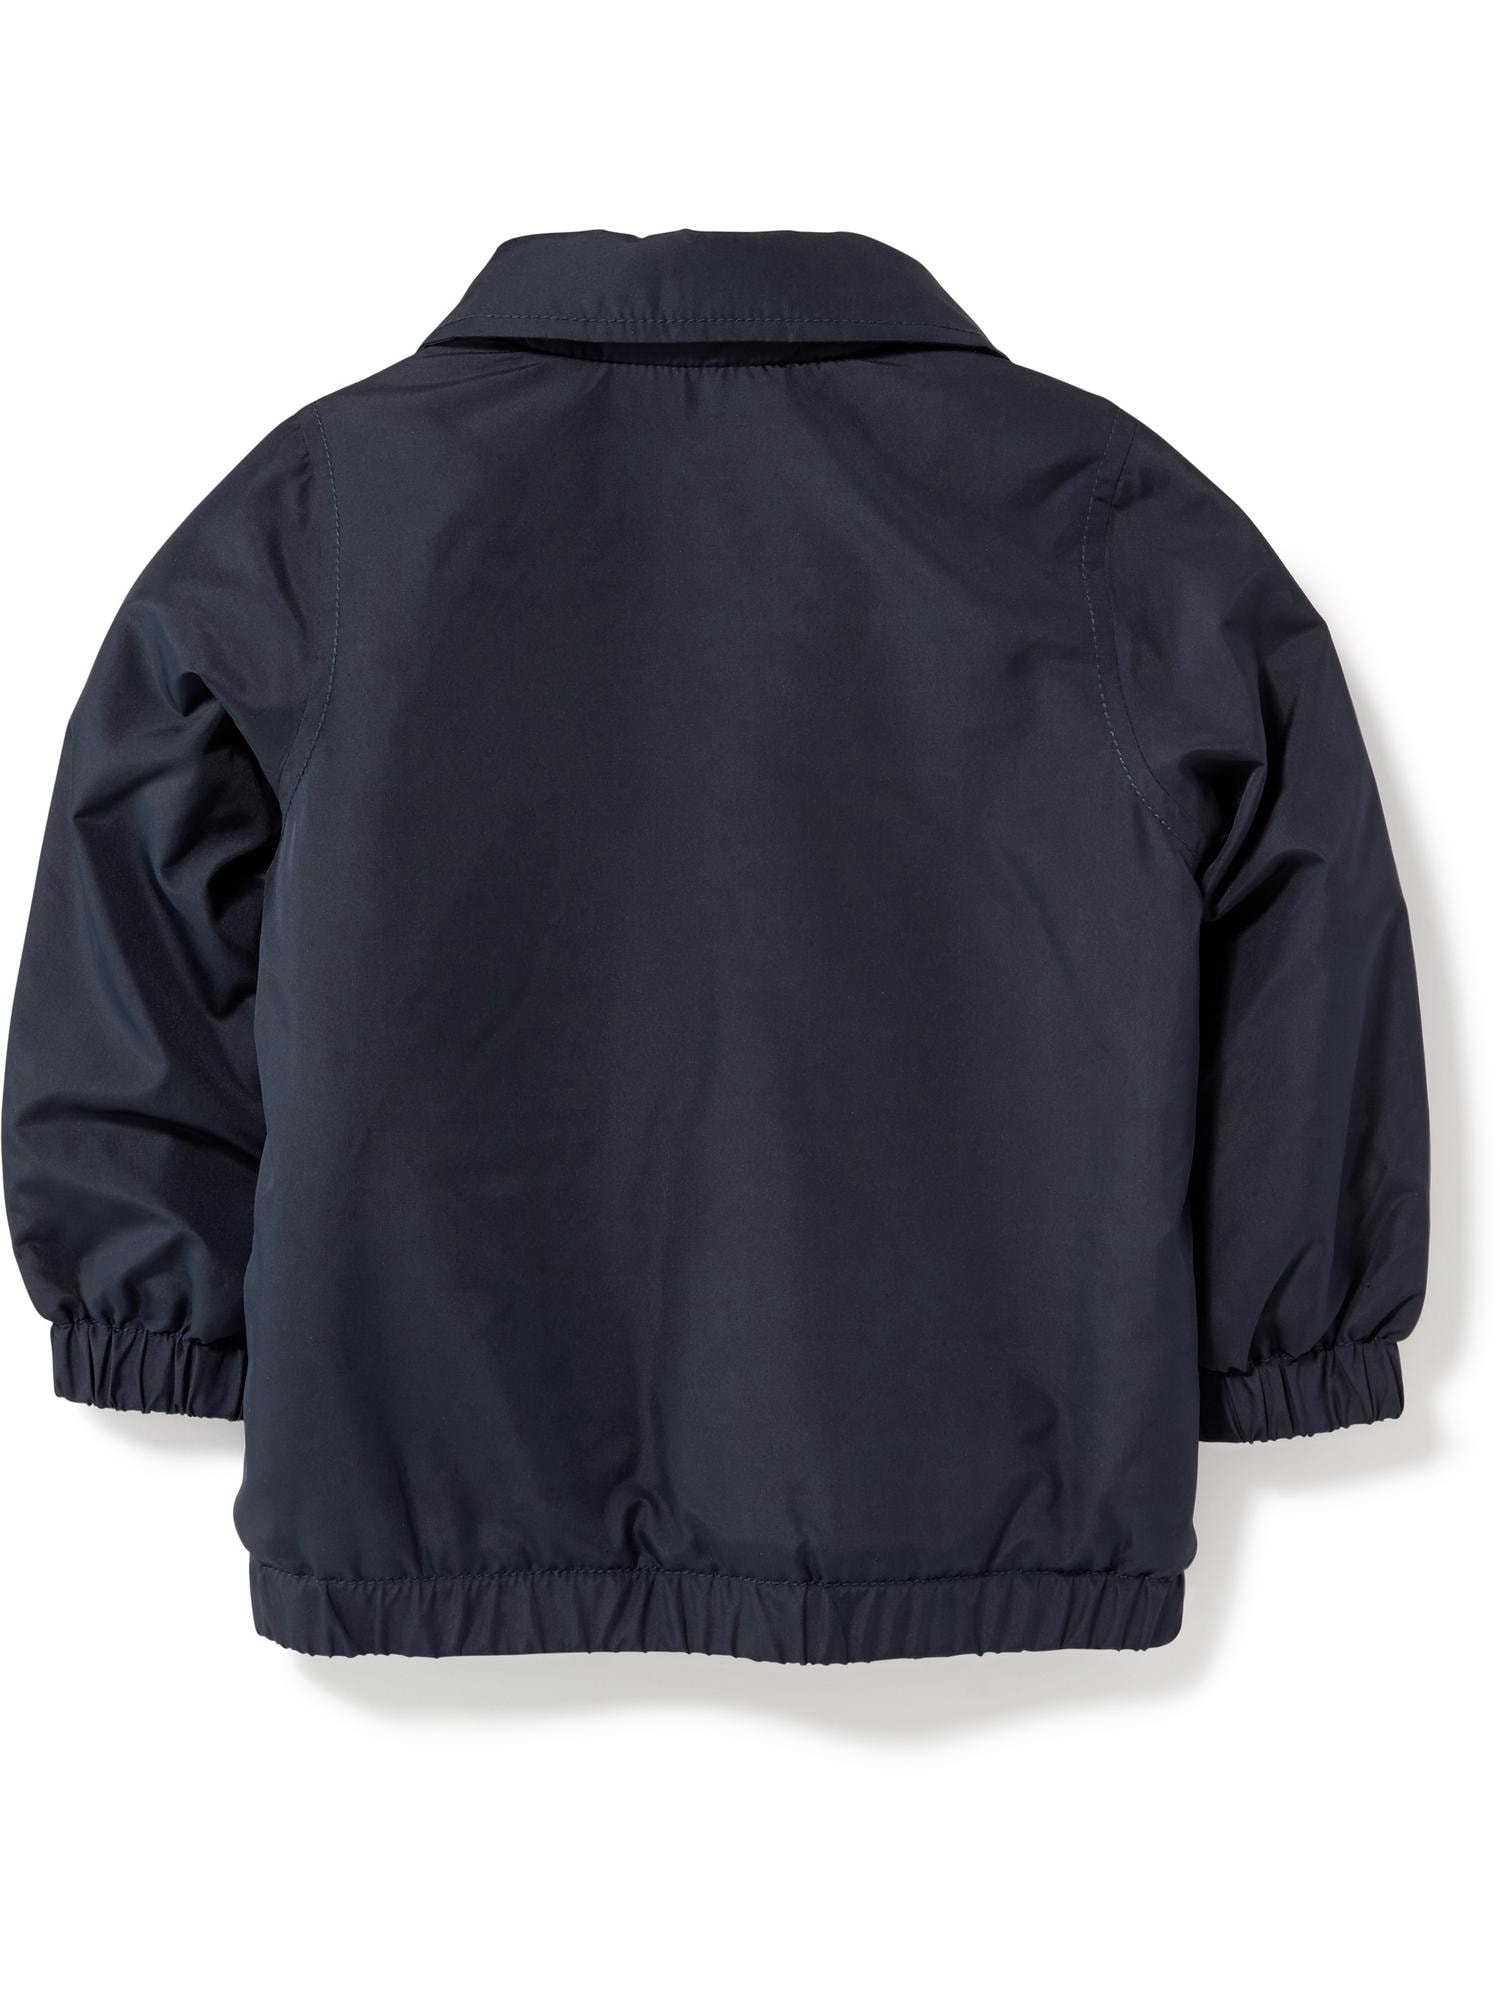 Micro-Fleece-Lined Jacket for Toddler Boys | Old Navy